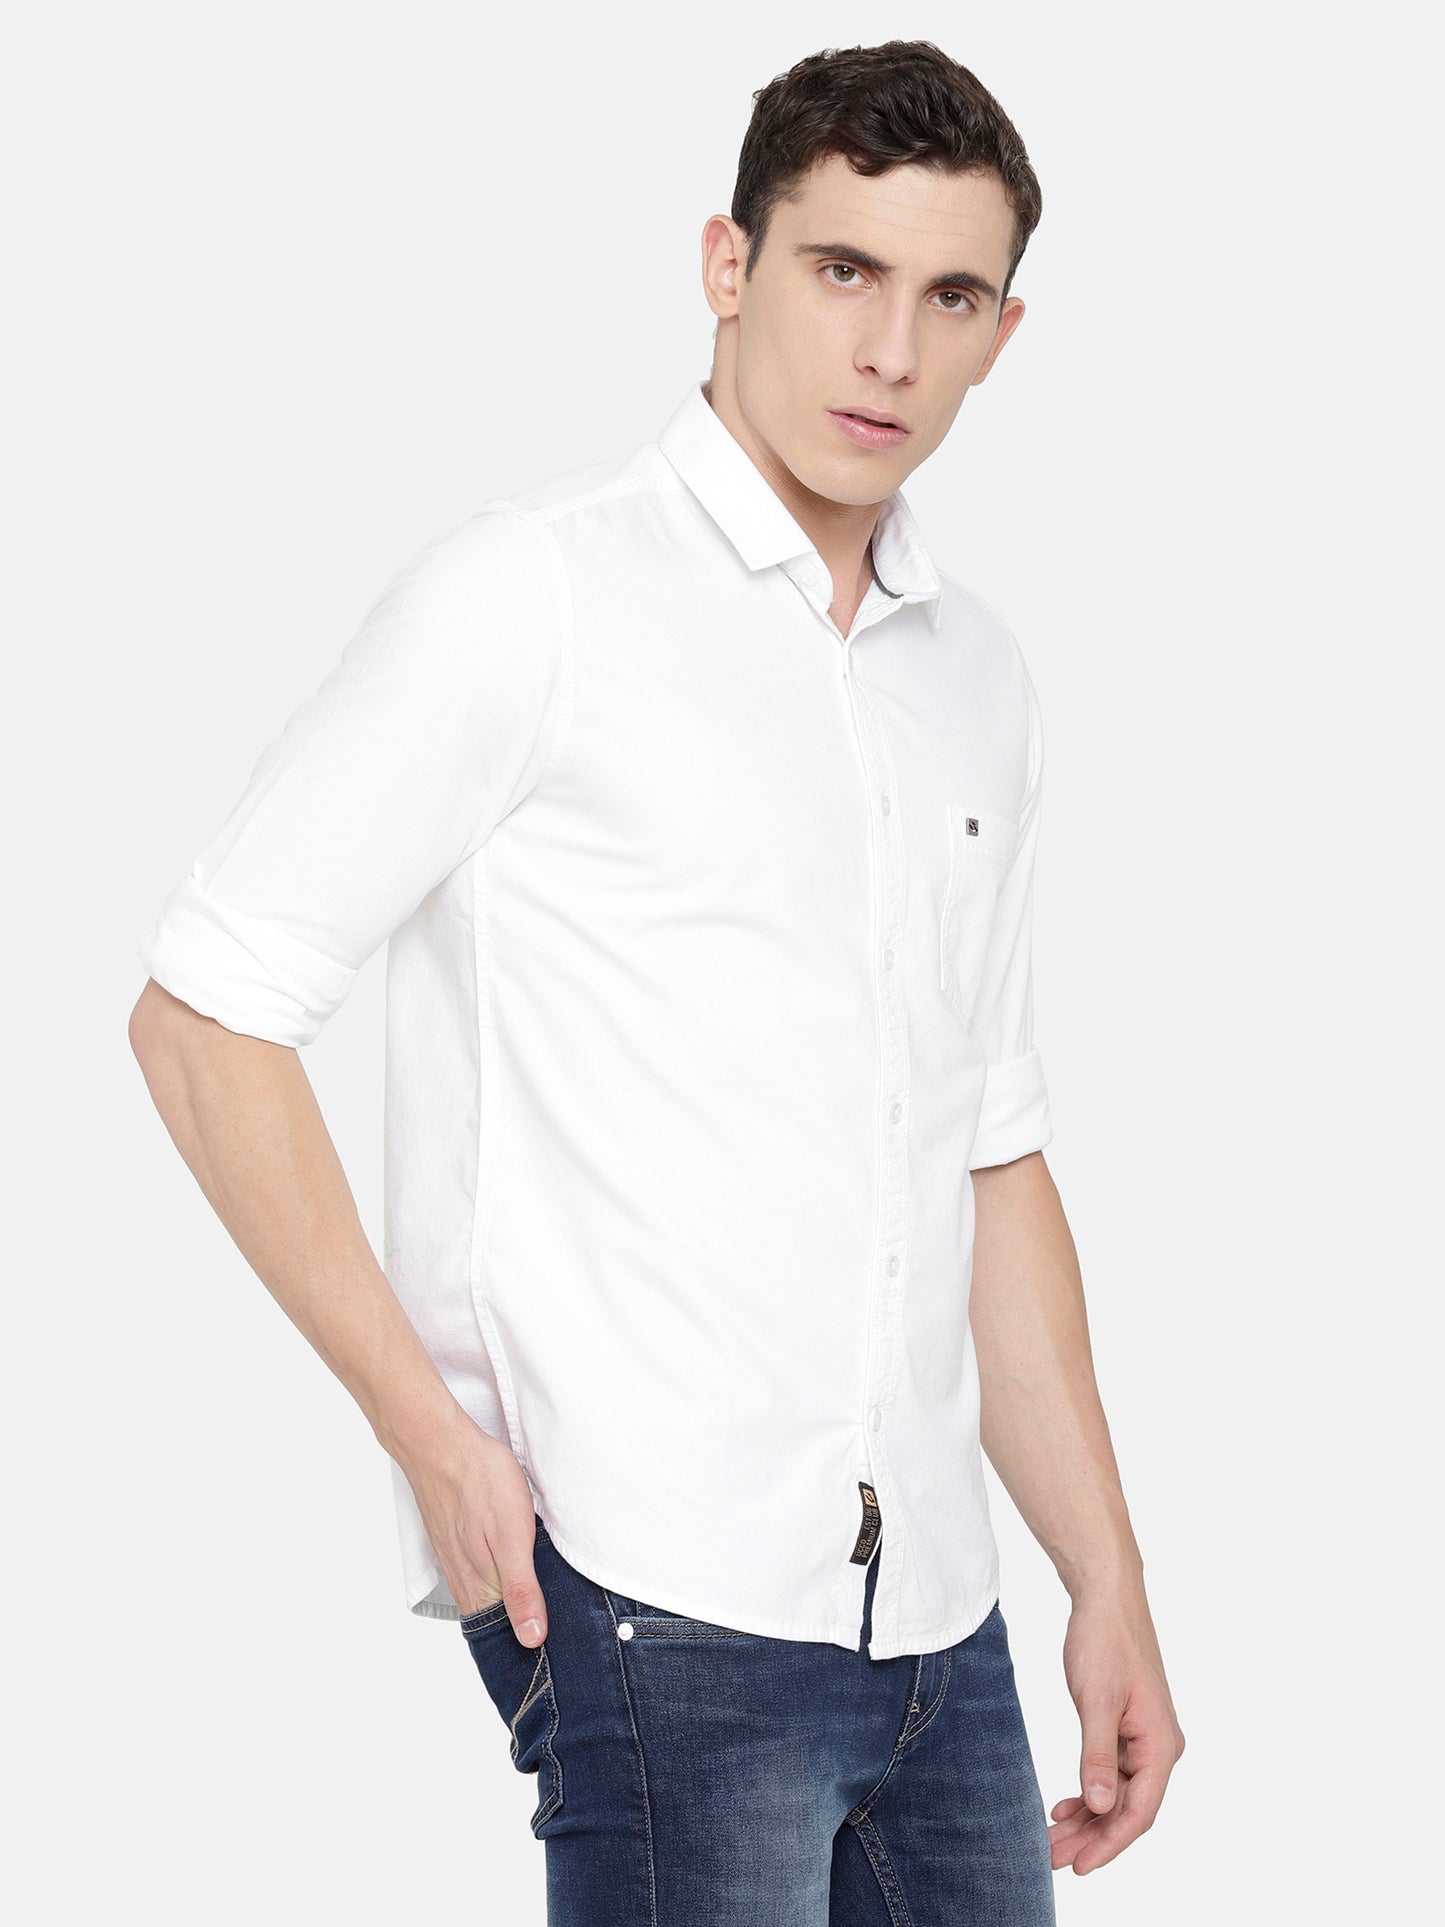 Slim Fit Solid White Oxford Shirt